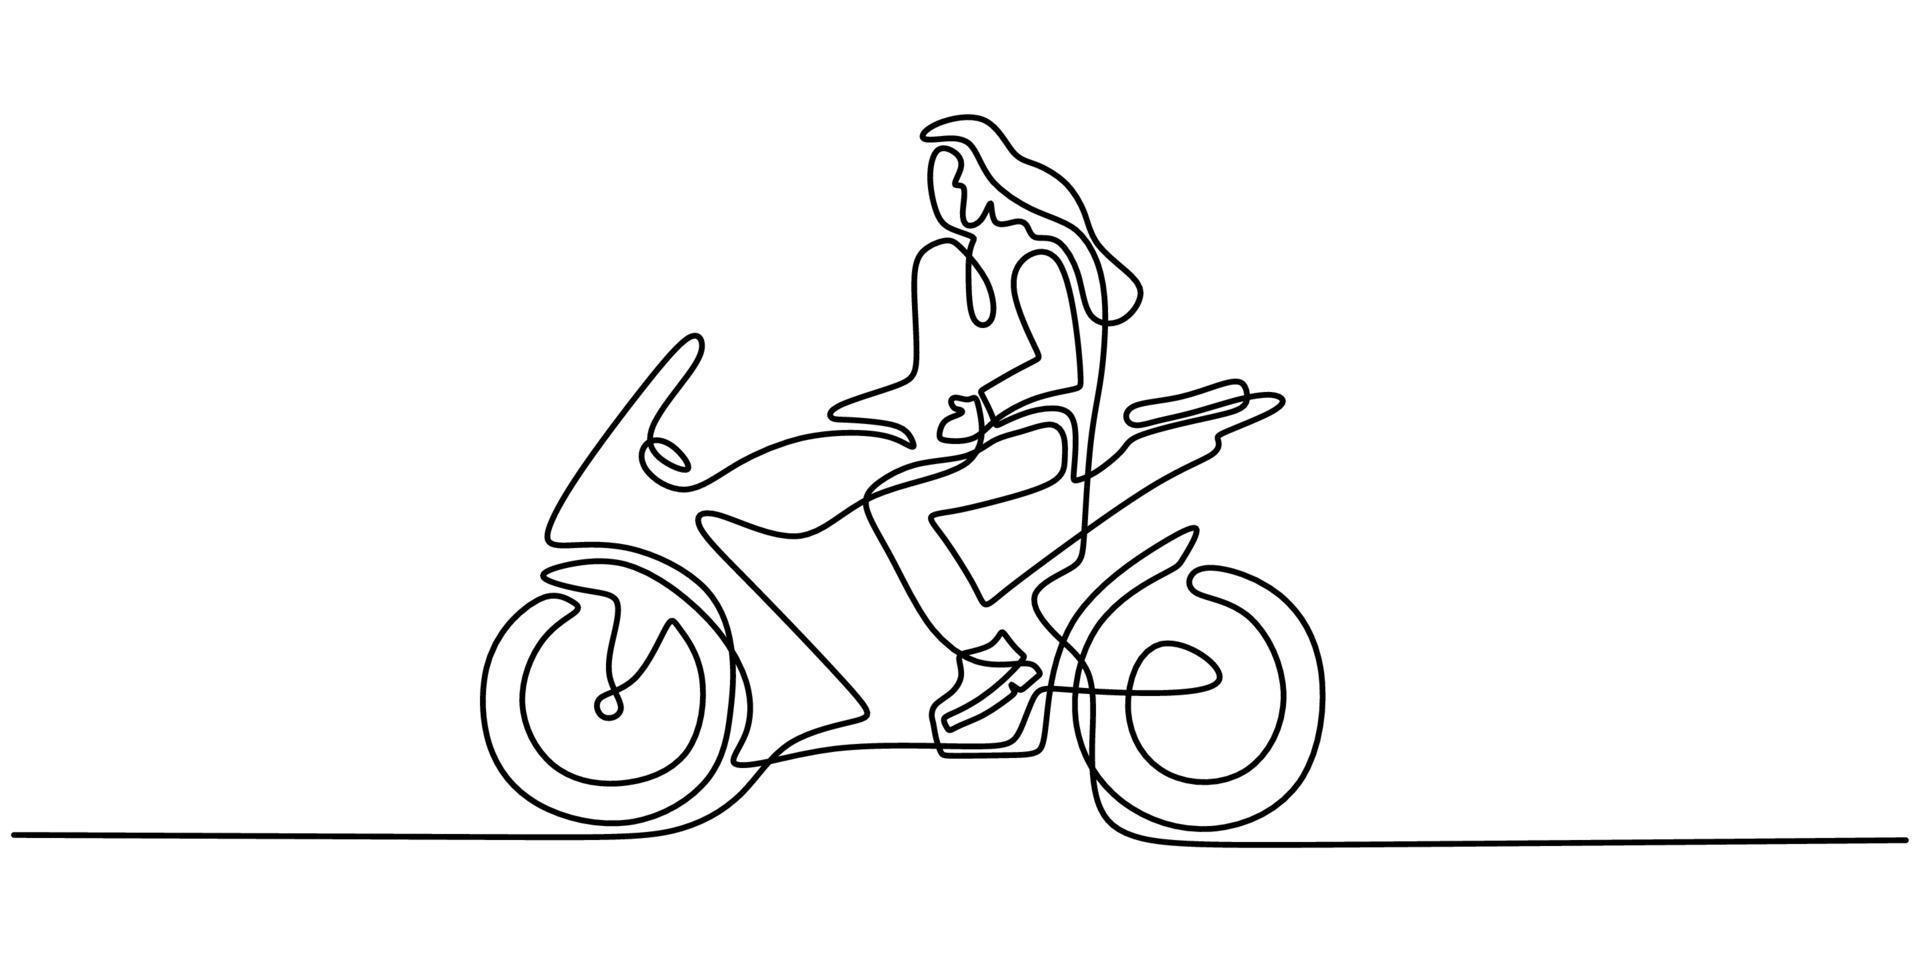 Continuous one single line of woman riding sport motorcycle vector